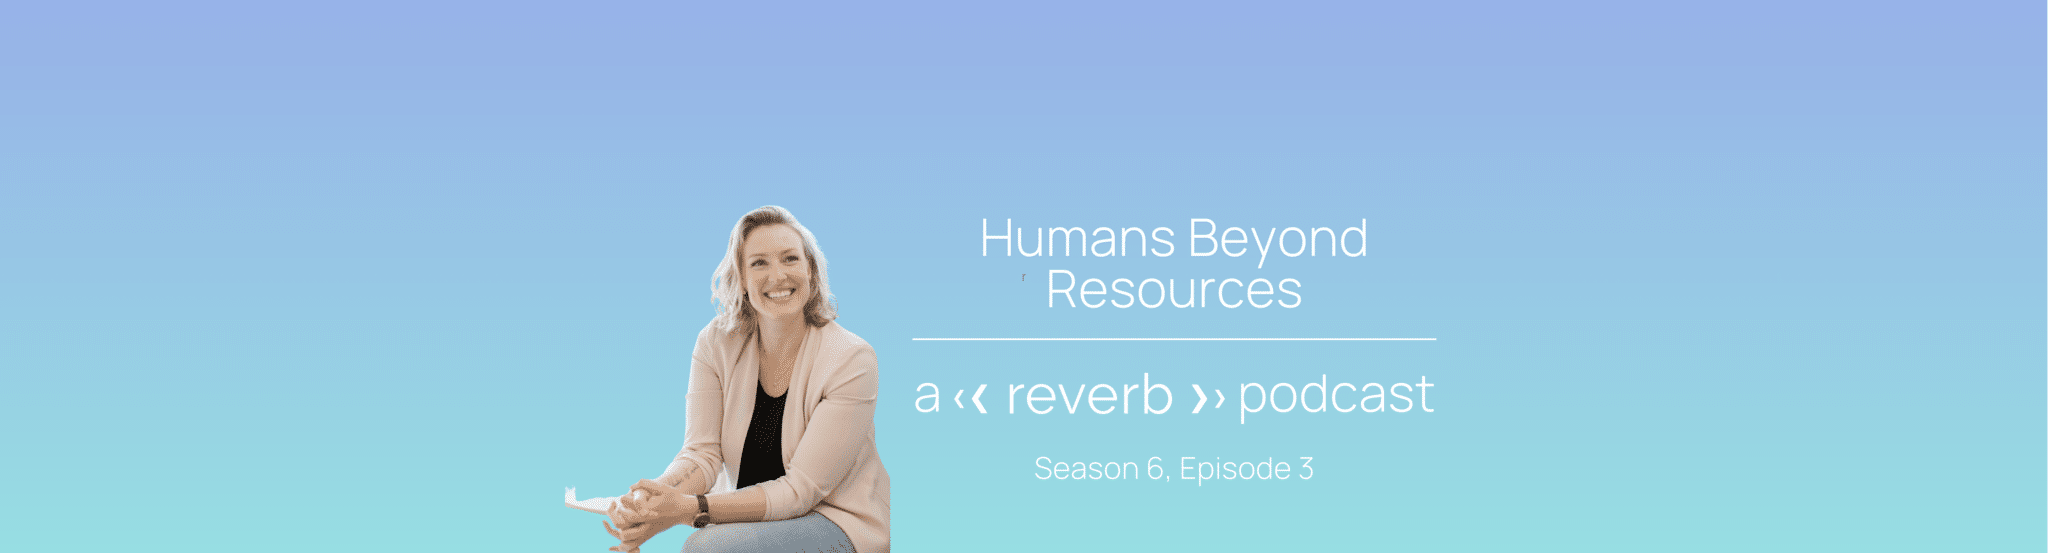 Becoming a B Corp with Natalie Hartkopf, CEO of Hightower